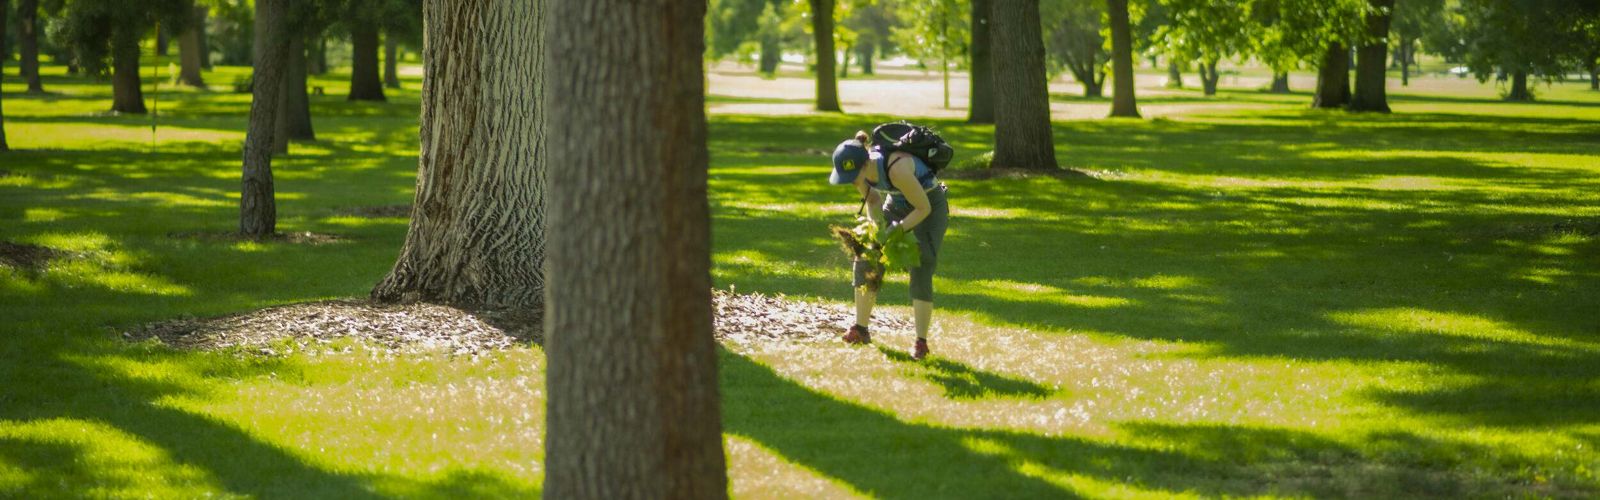 A person picking up trash in a green park.